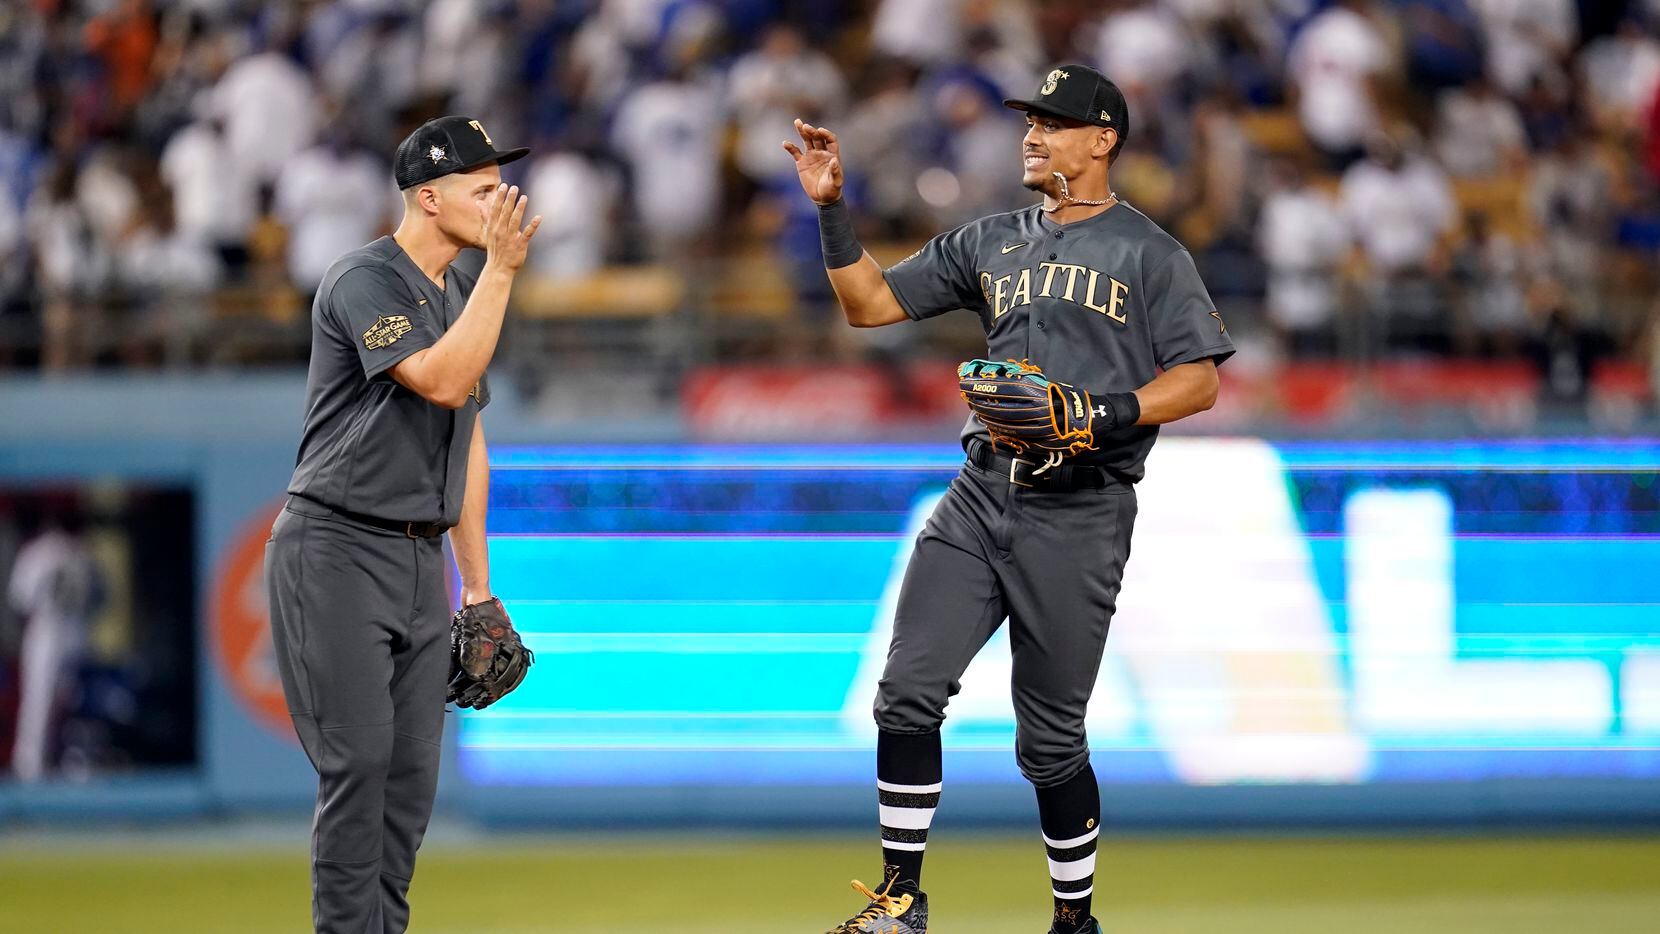 American claims straight win over League in 2022 MLB All-Star